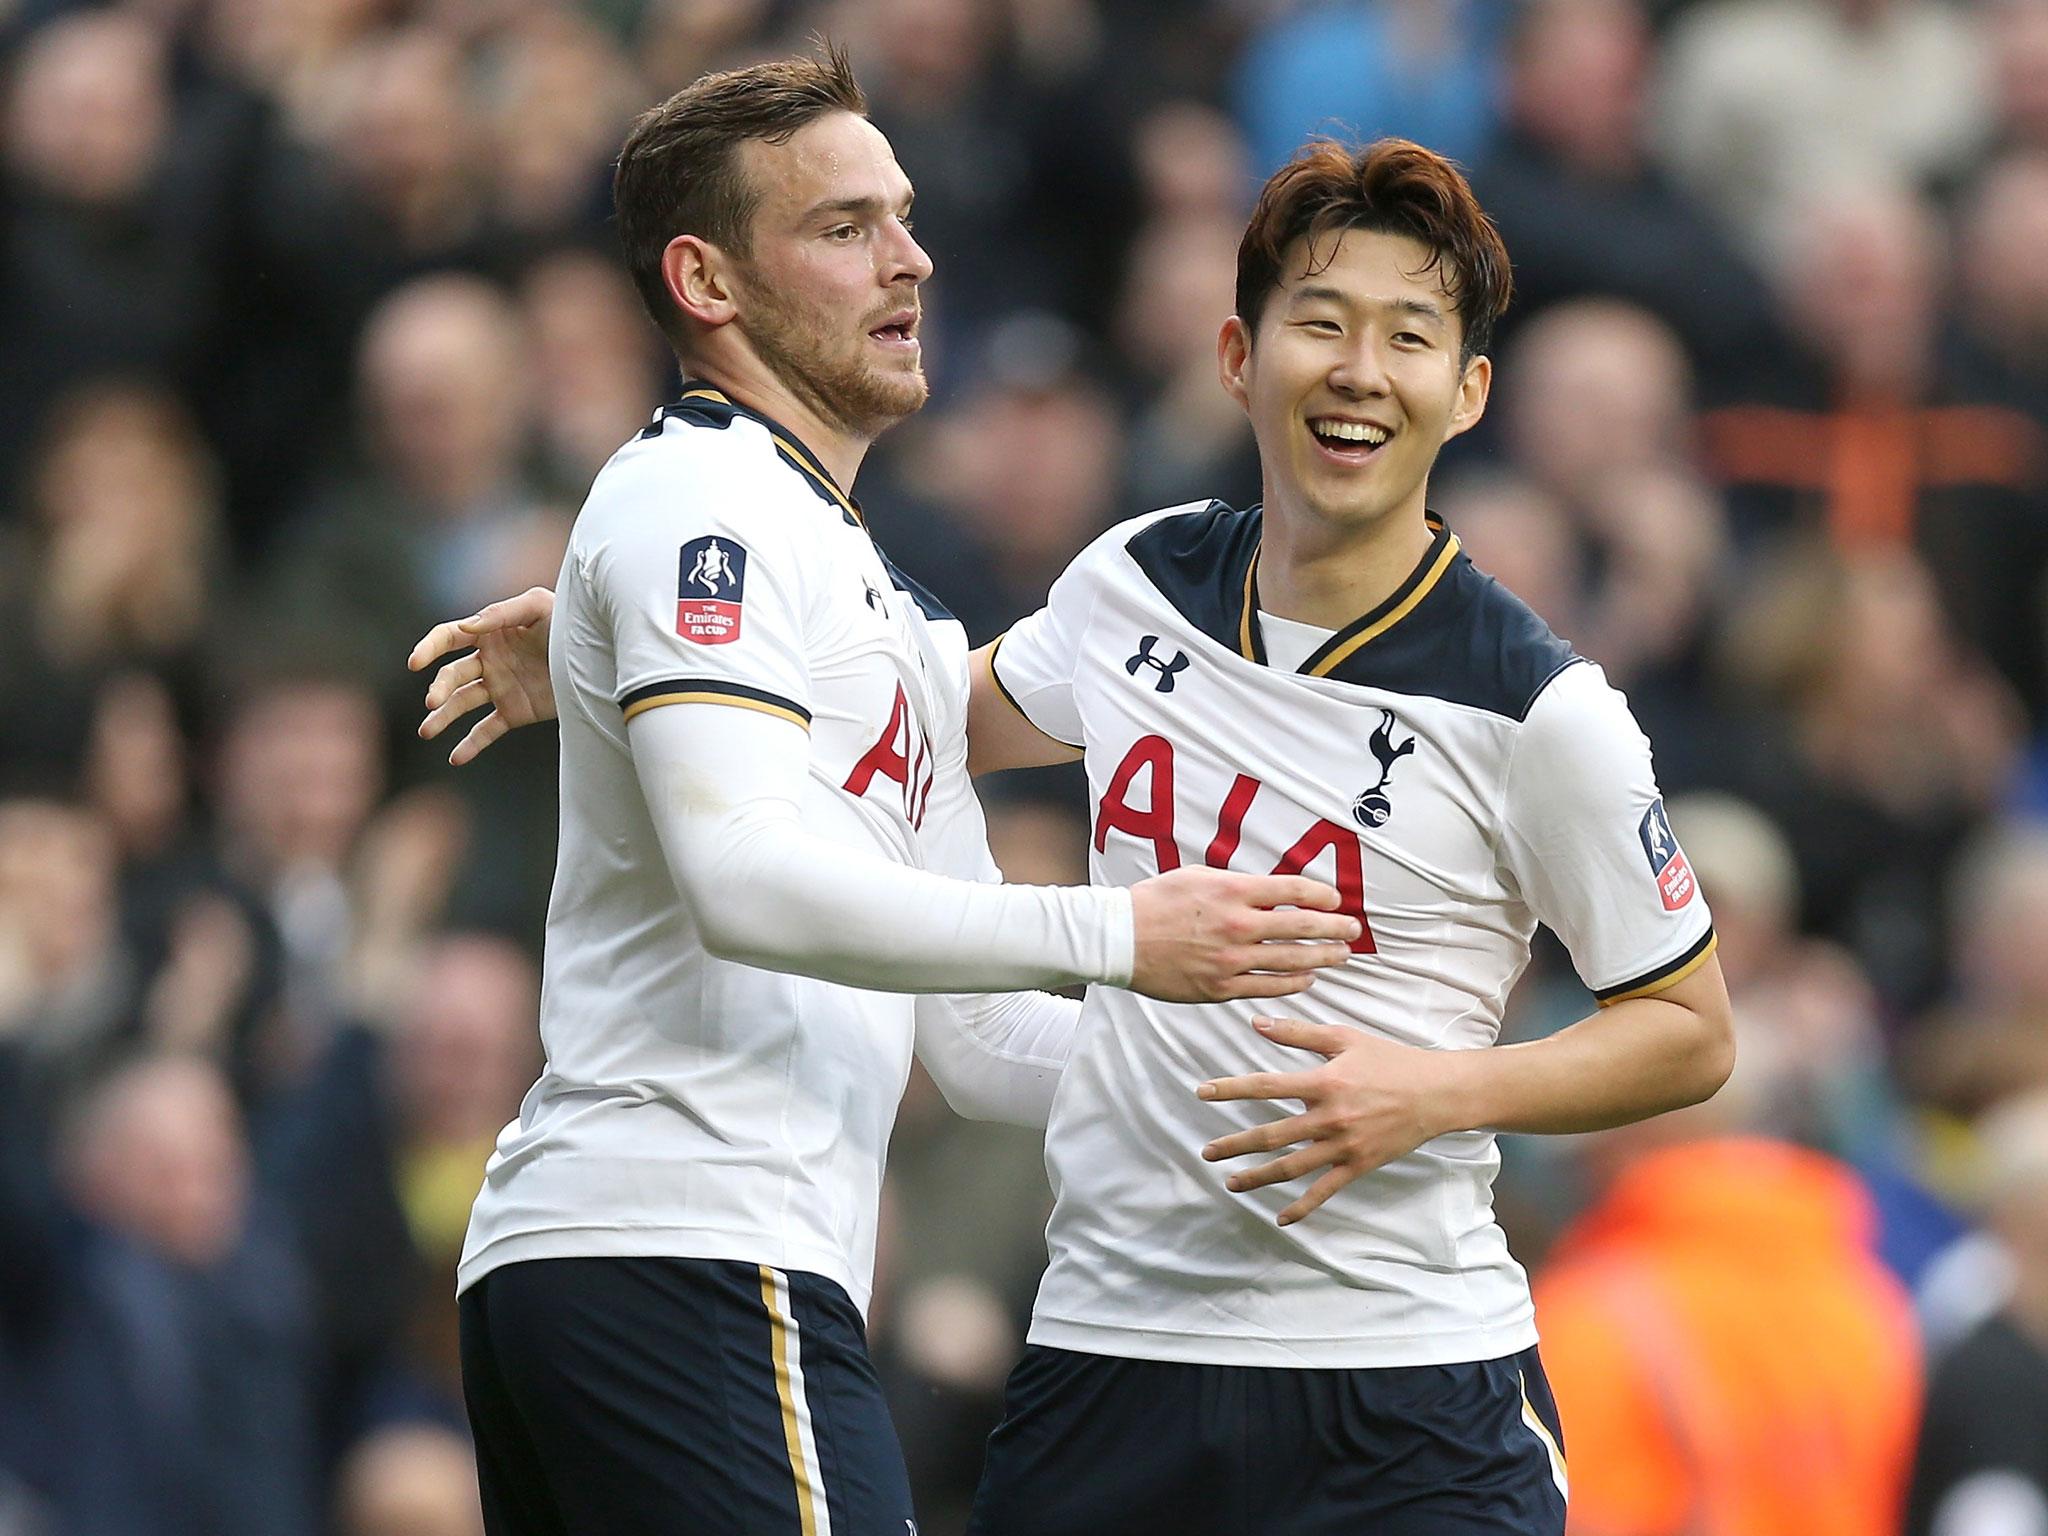 Vincent Janssen has been backed to fill the large gap left by Harry Kane in the Spurs line-up